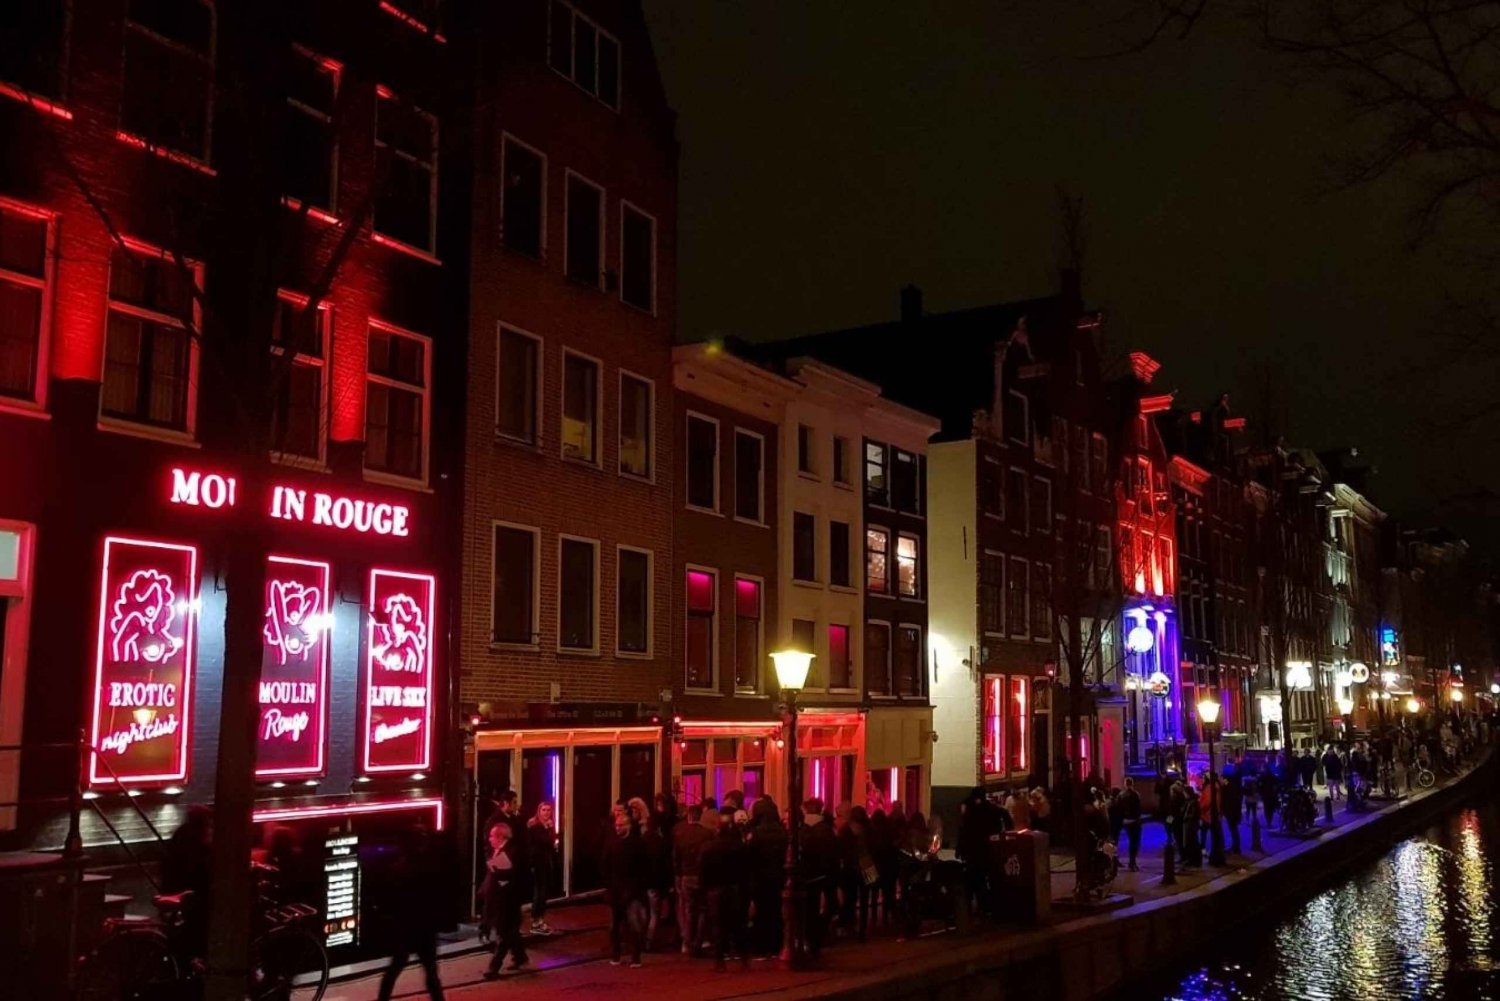 Amsterdam: Red Light District 1.5–Hour Night Walking Tour